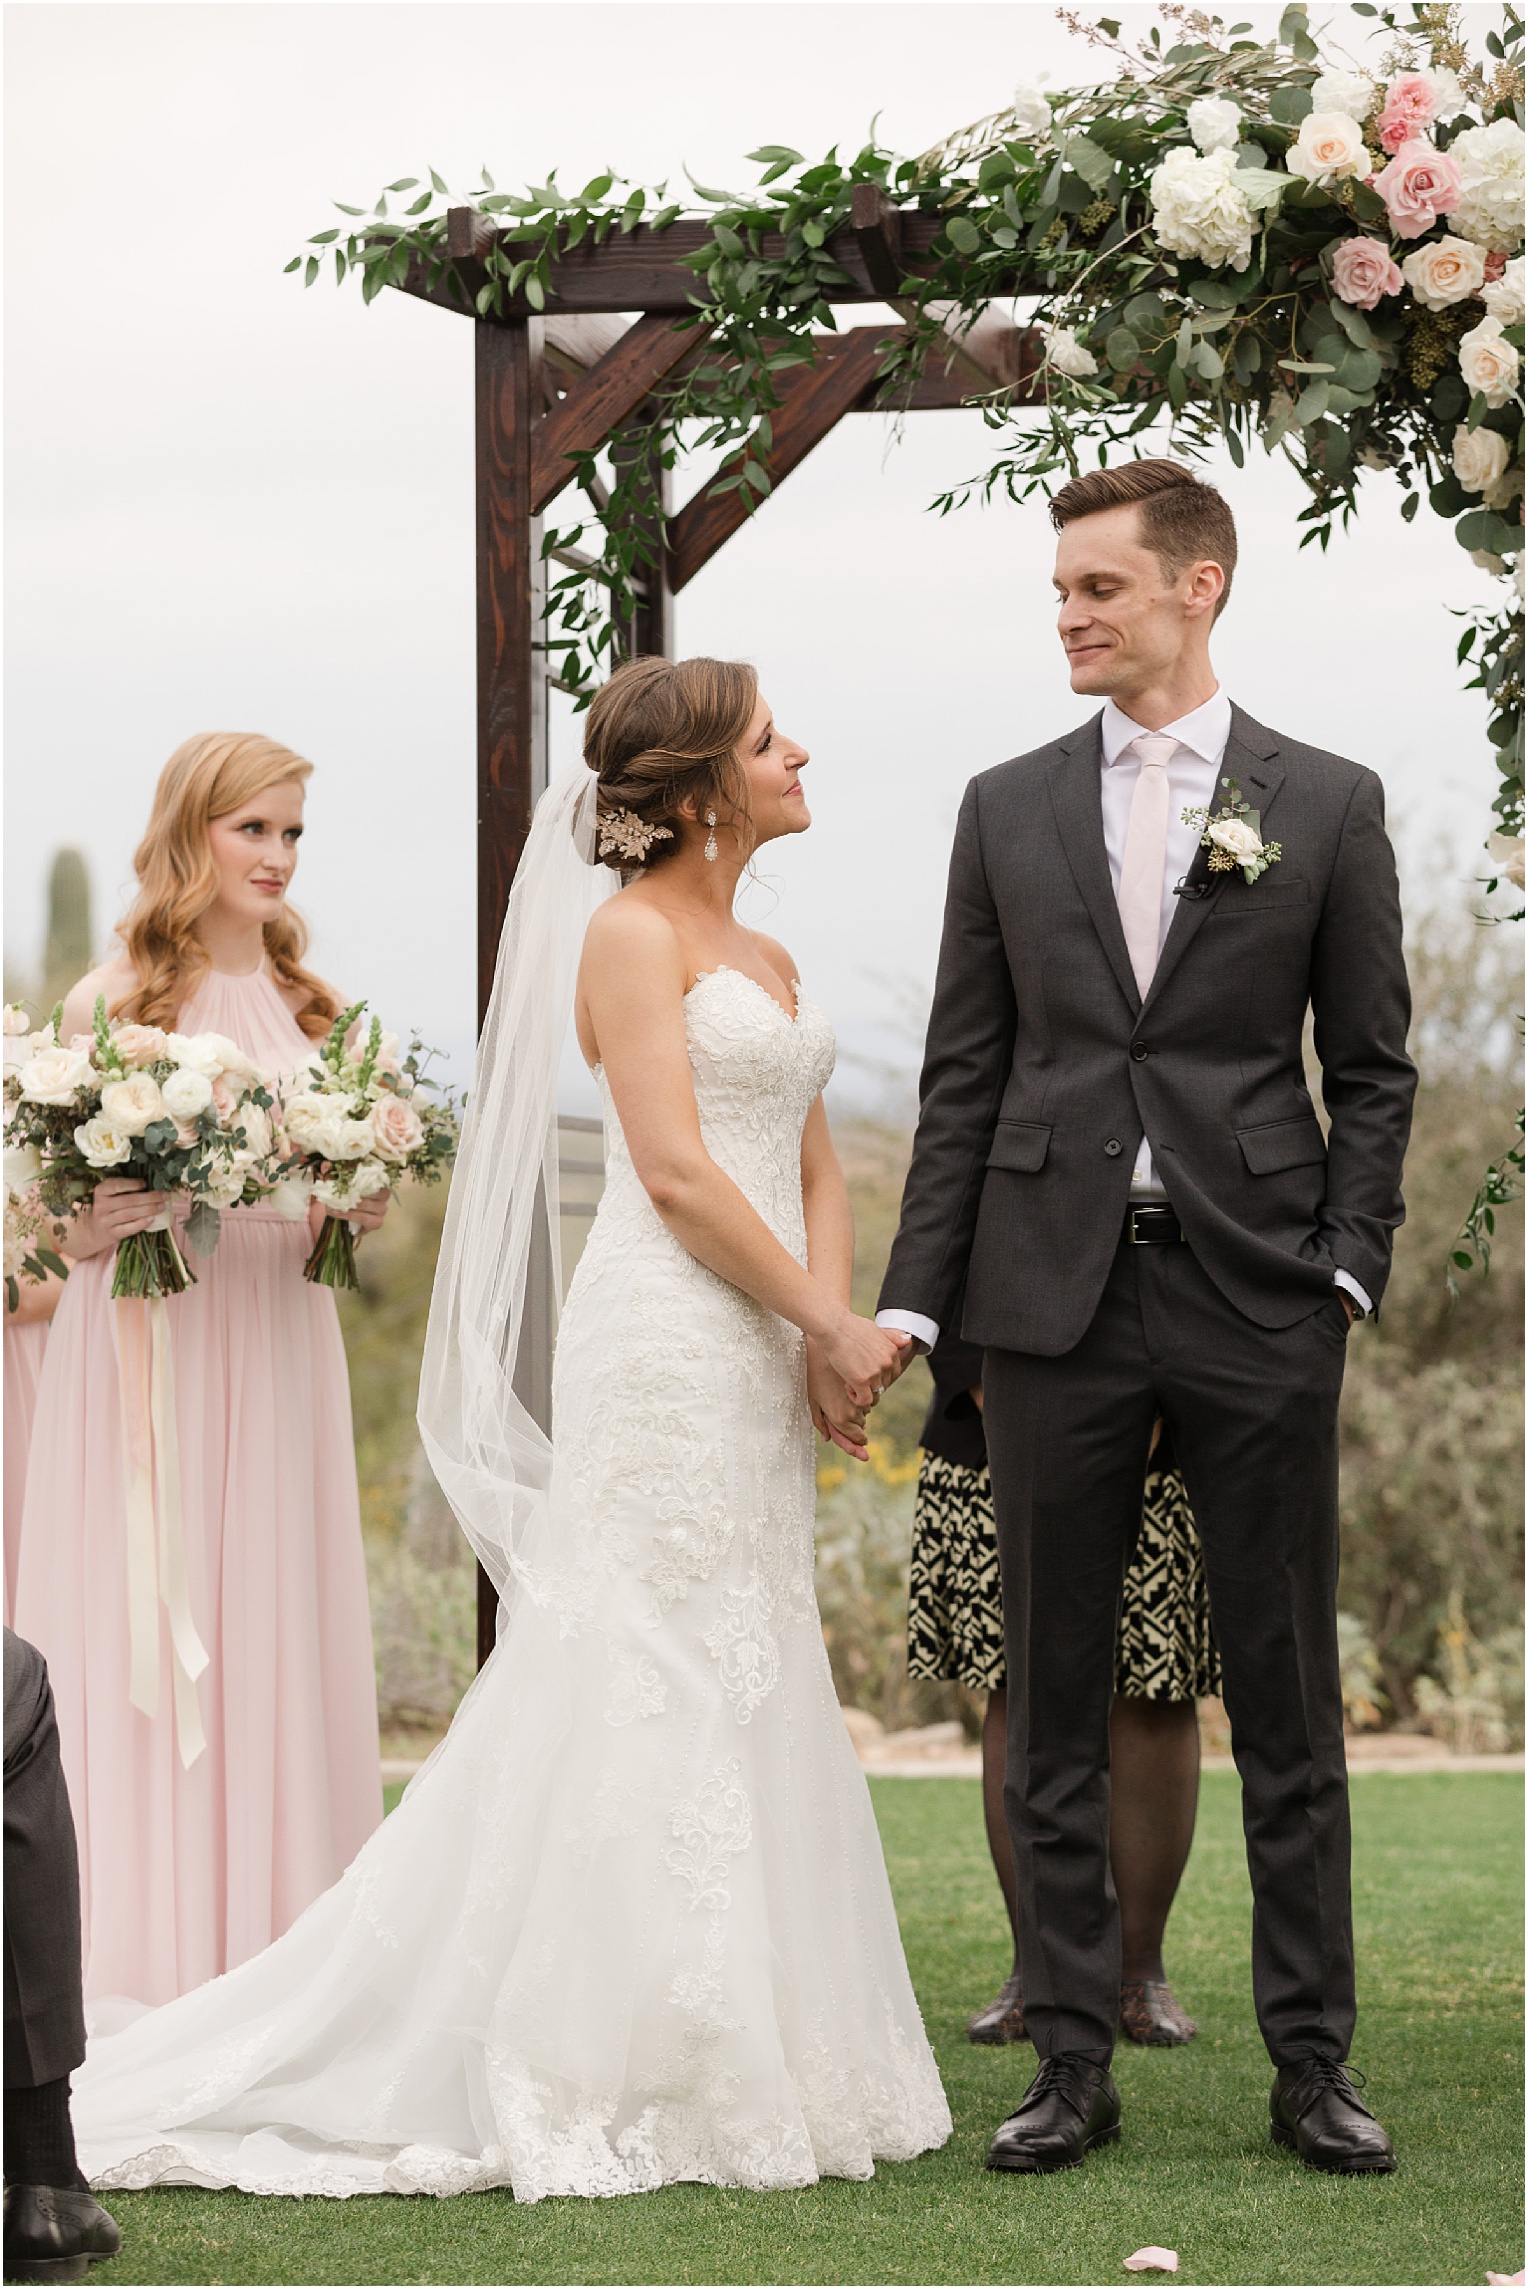 Highlands at Dove Mountain Wedding Grace + Danny romantic bride and groom outdoor blush ceremony with floral altar